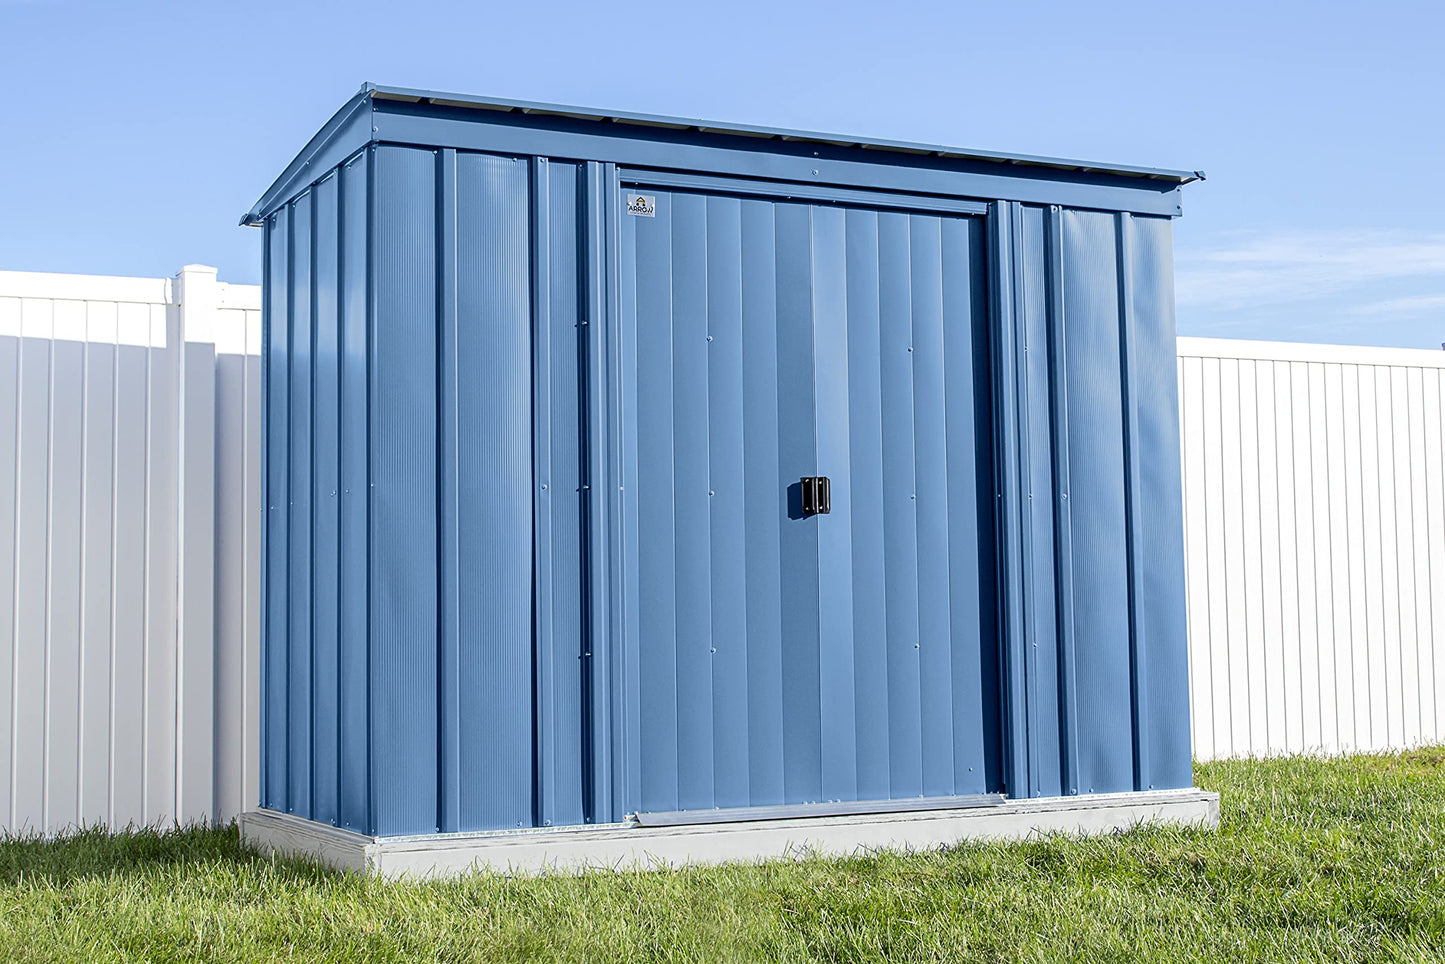 Arrow Shed Classic 8' x 4' Outdoor Padlockable Steel Storage Shed Building, Blue Grey 8' x 4'